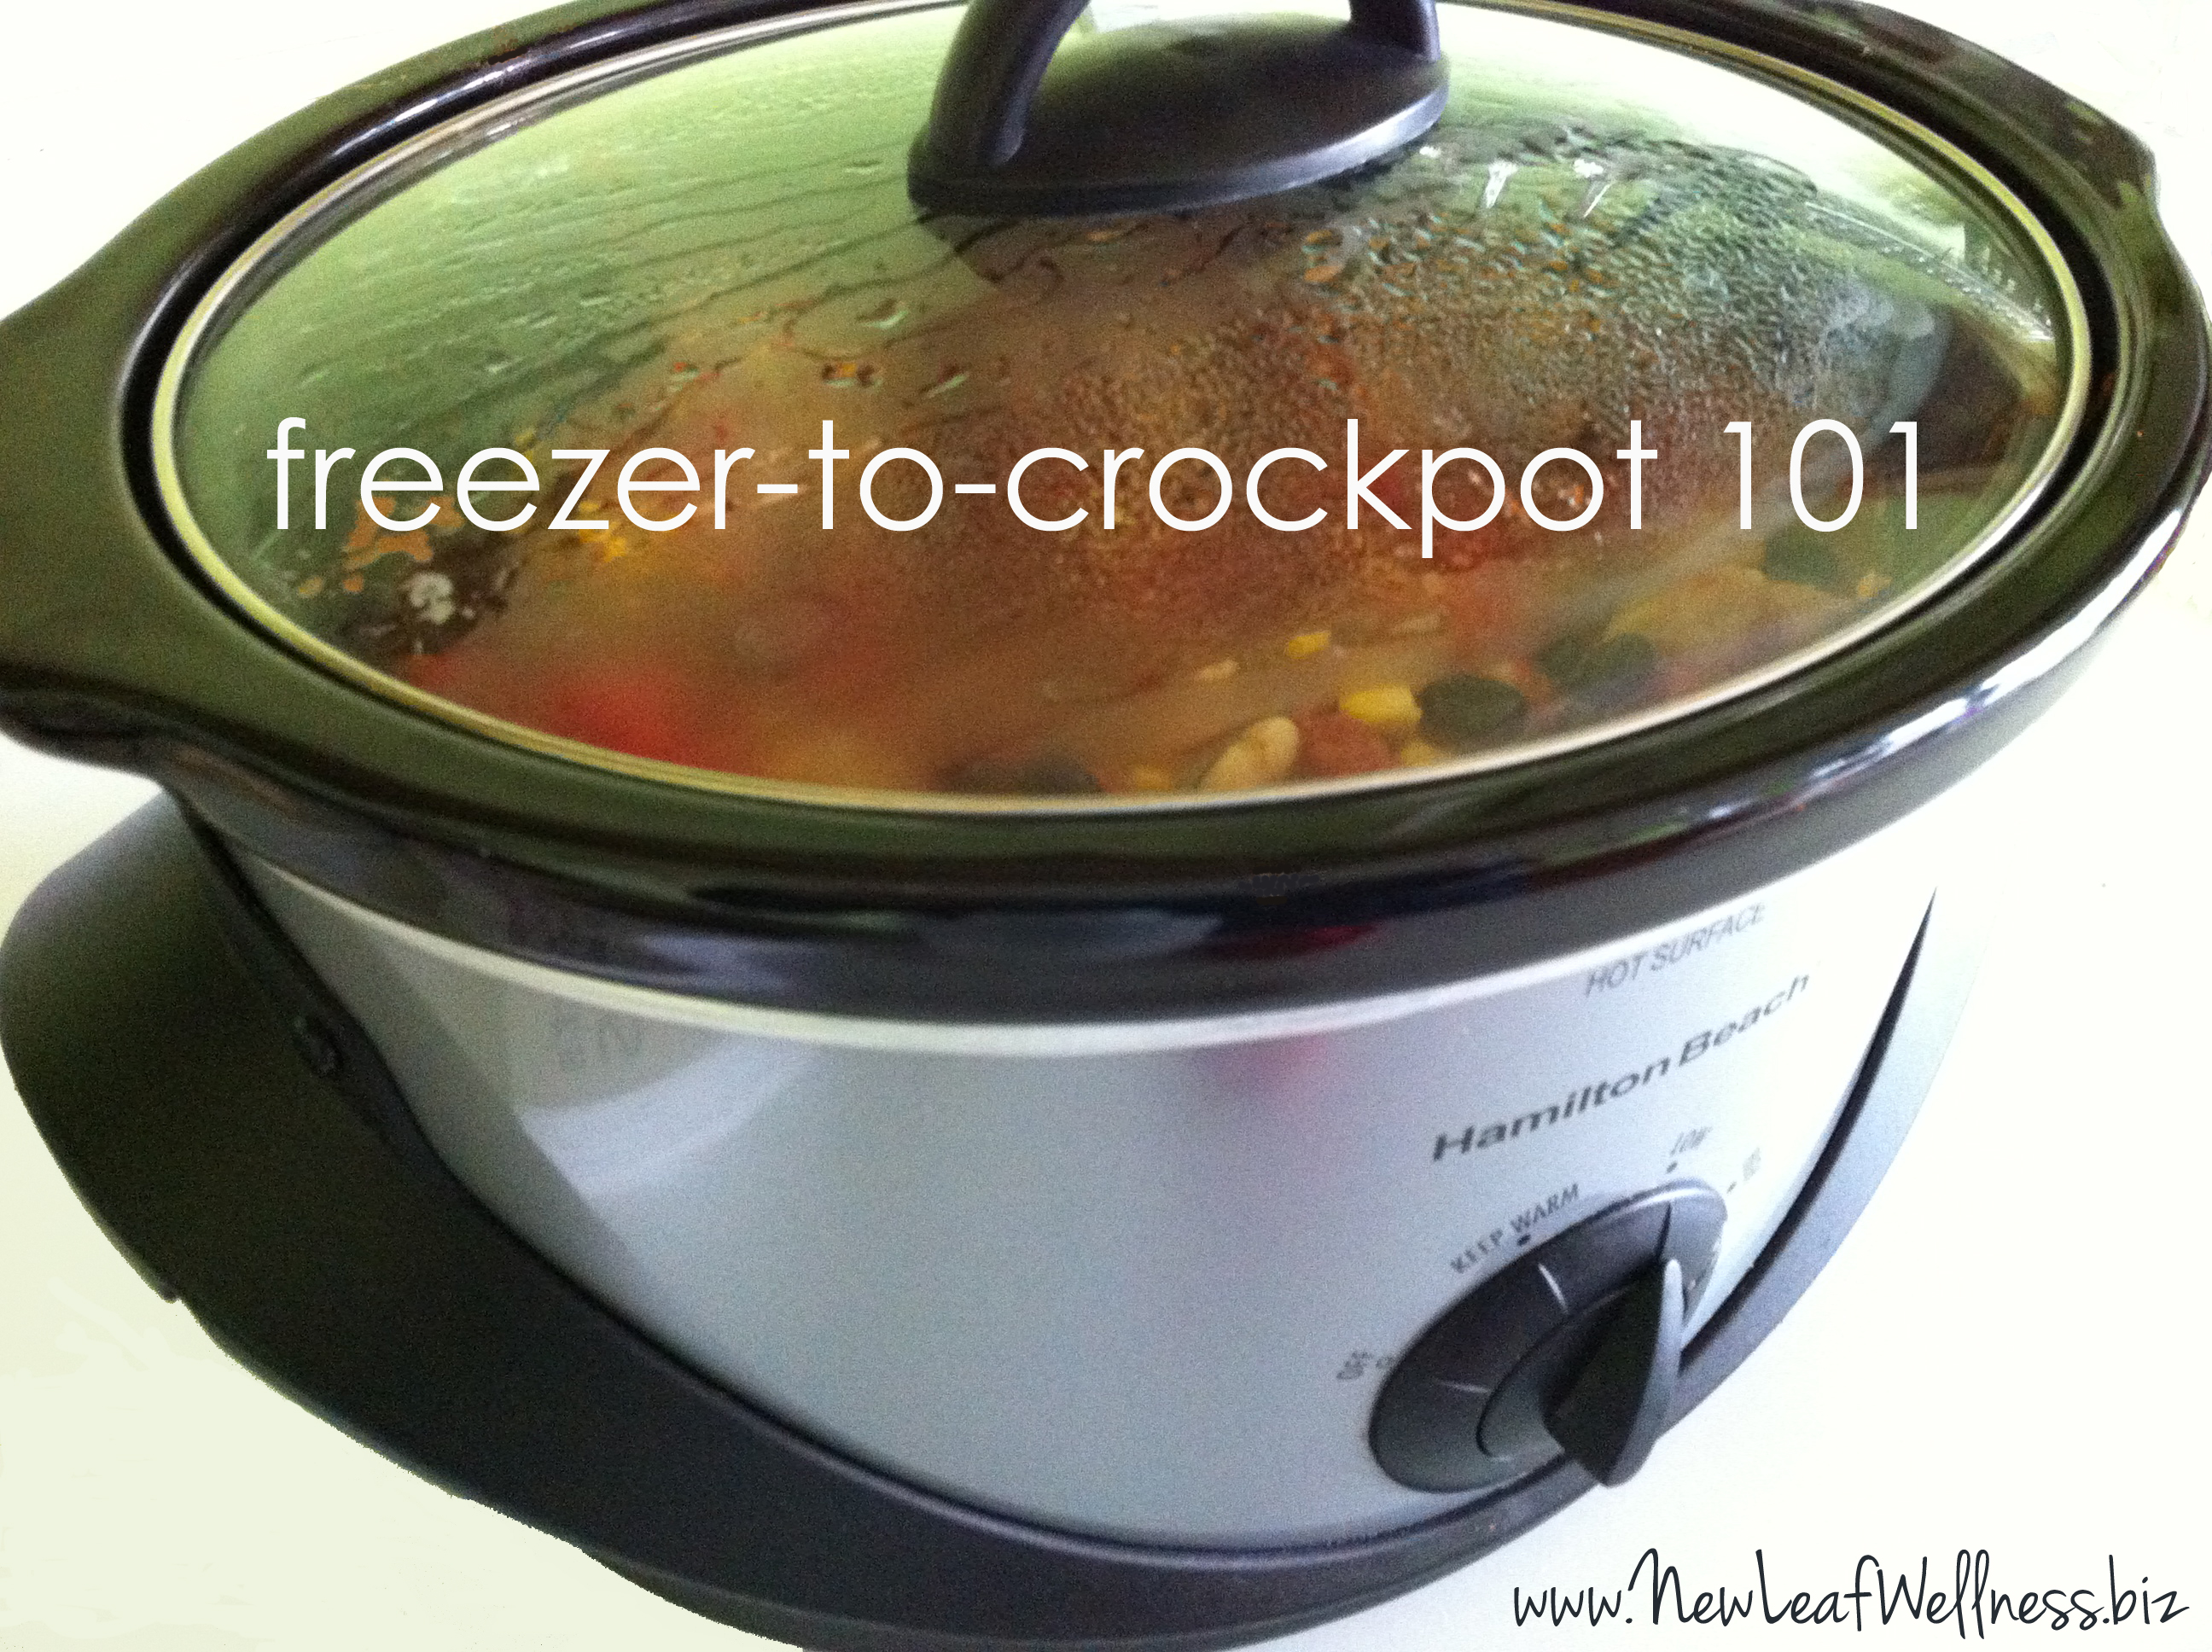 Slow Cookers 101: How to Use a Crock Pot